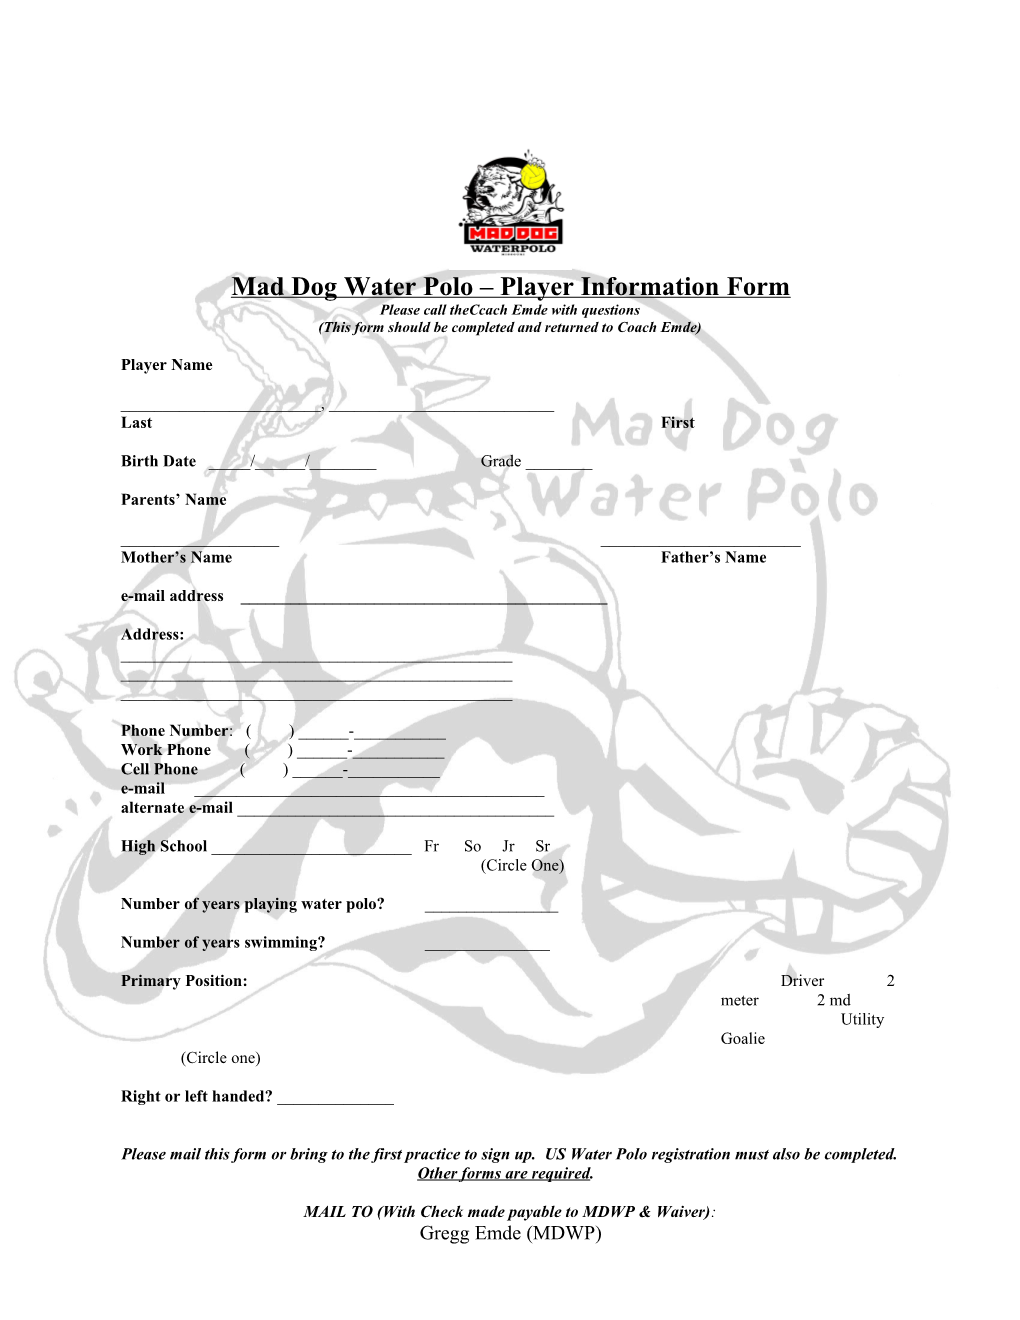 Mad Dog Water Polo Registration Form